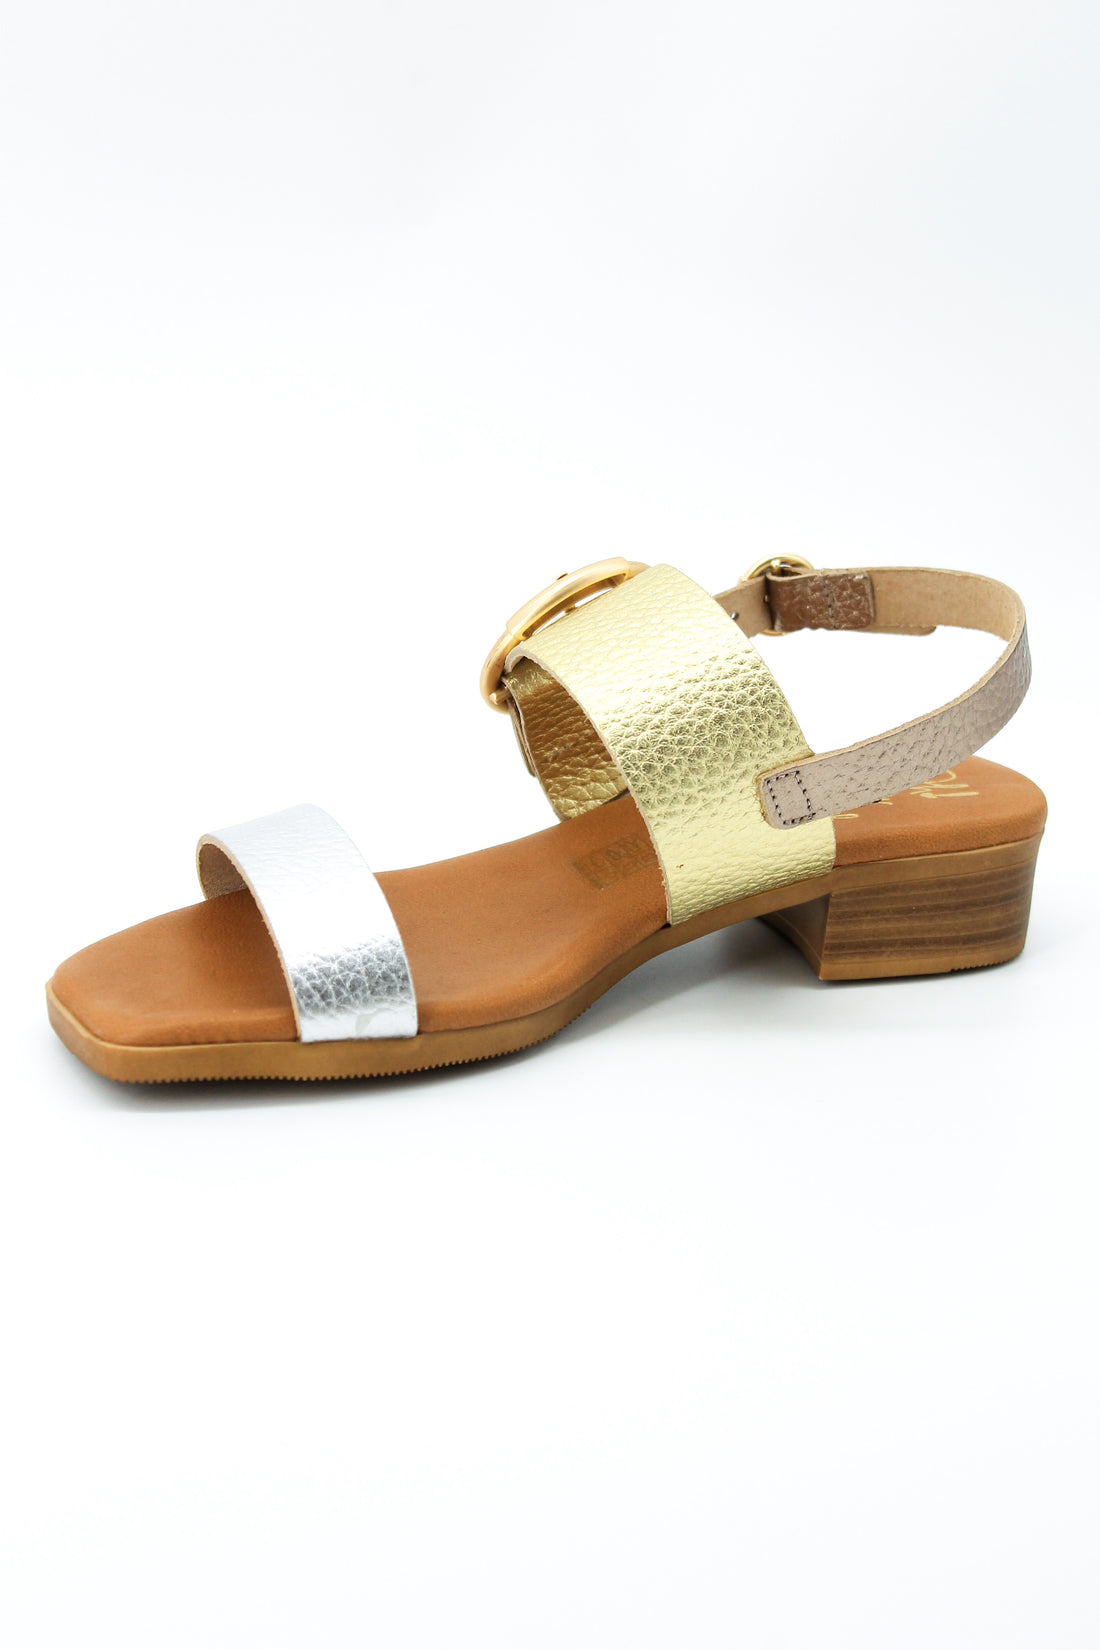 Oh My Sandals 5170 Gold and Silver